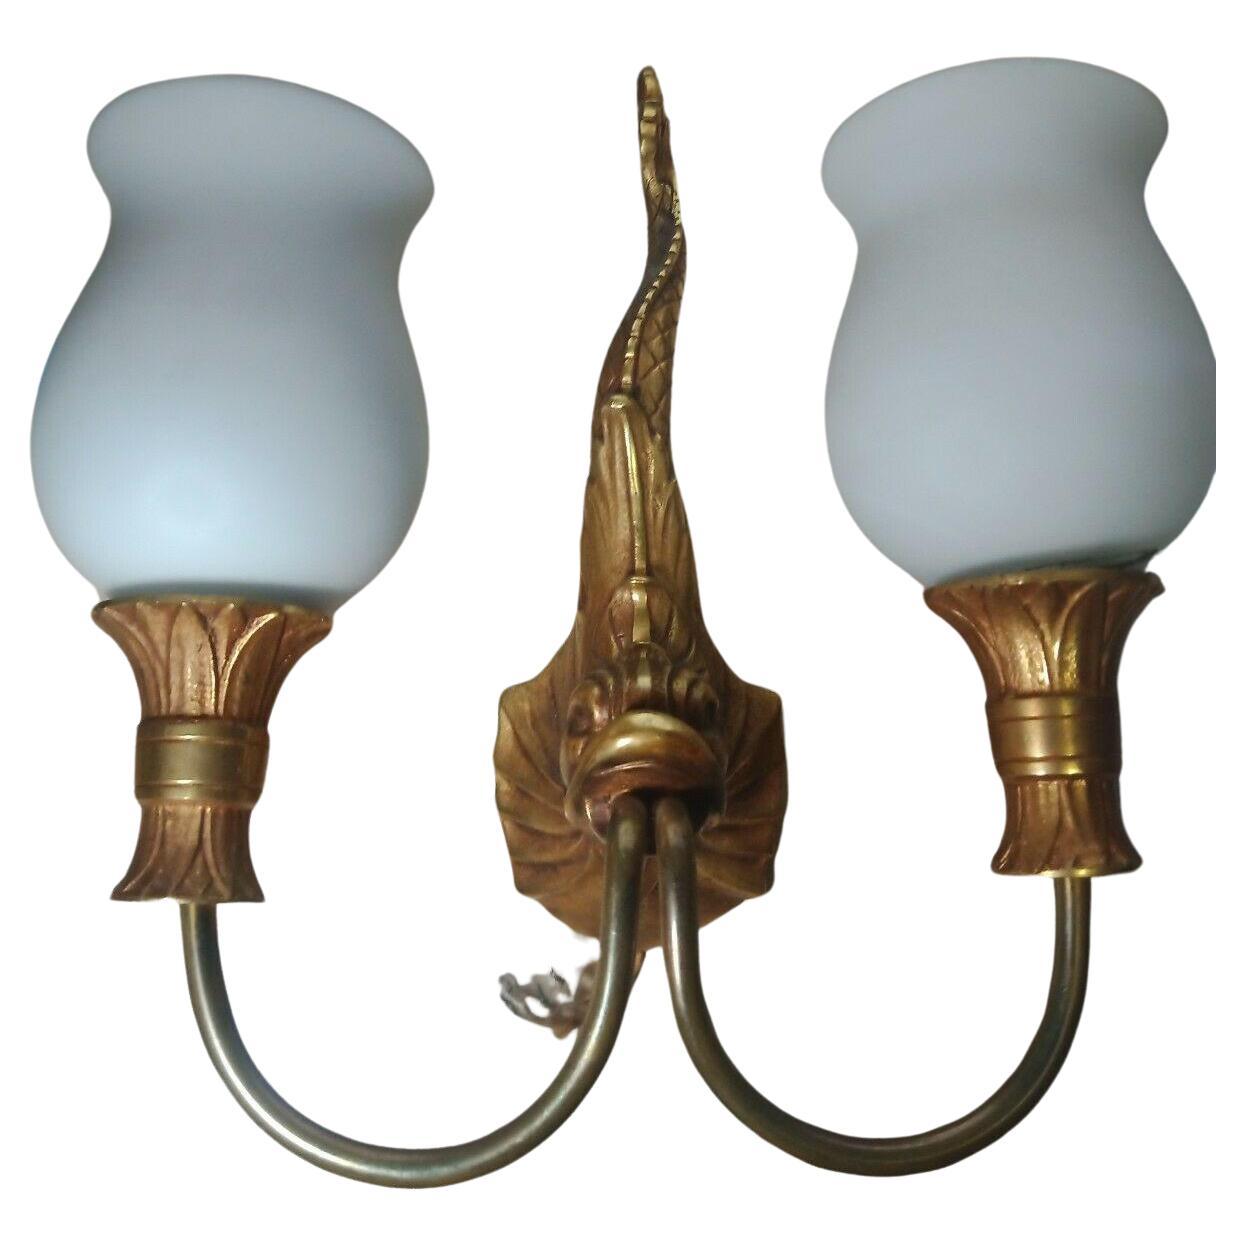 Set of 3 1940's French Neoclassical style Gilt Bronze Fish/ Dolphon Wall Sconces